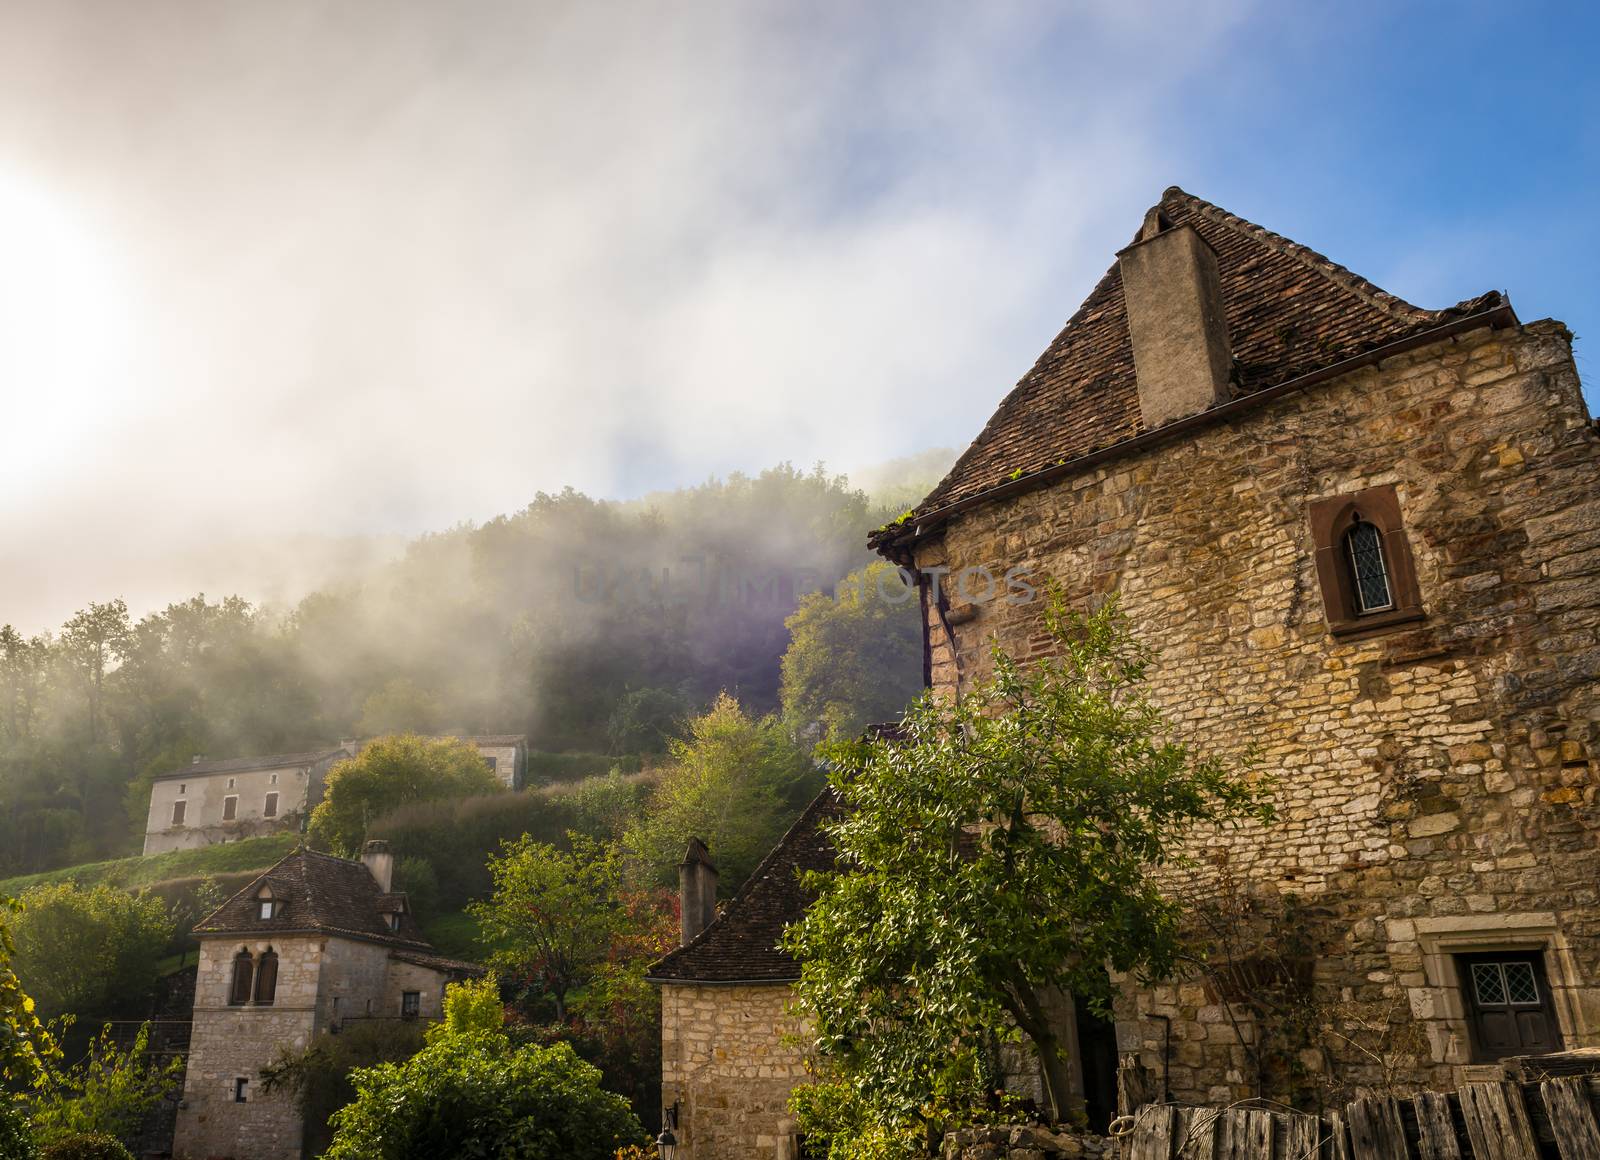 Saint Cirq Lapopie in the Lot in Occitanie in France by Frederic